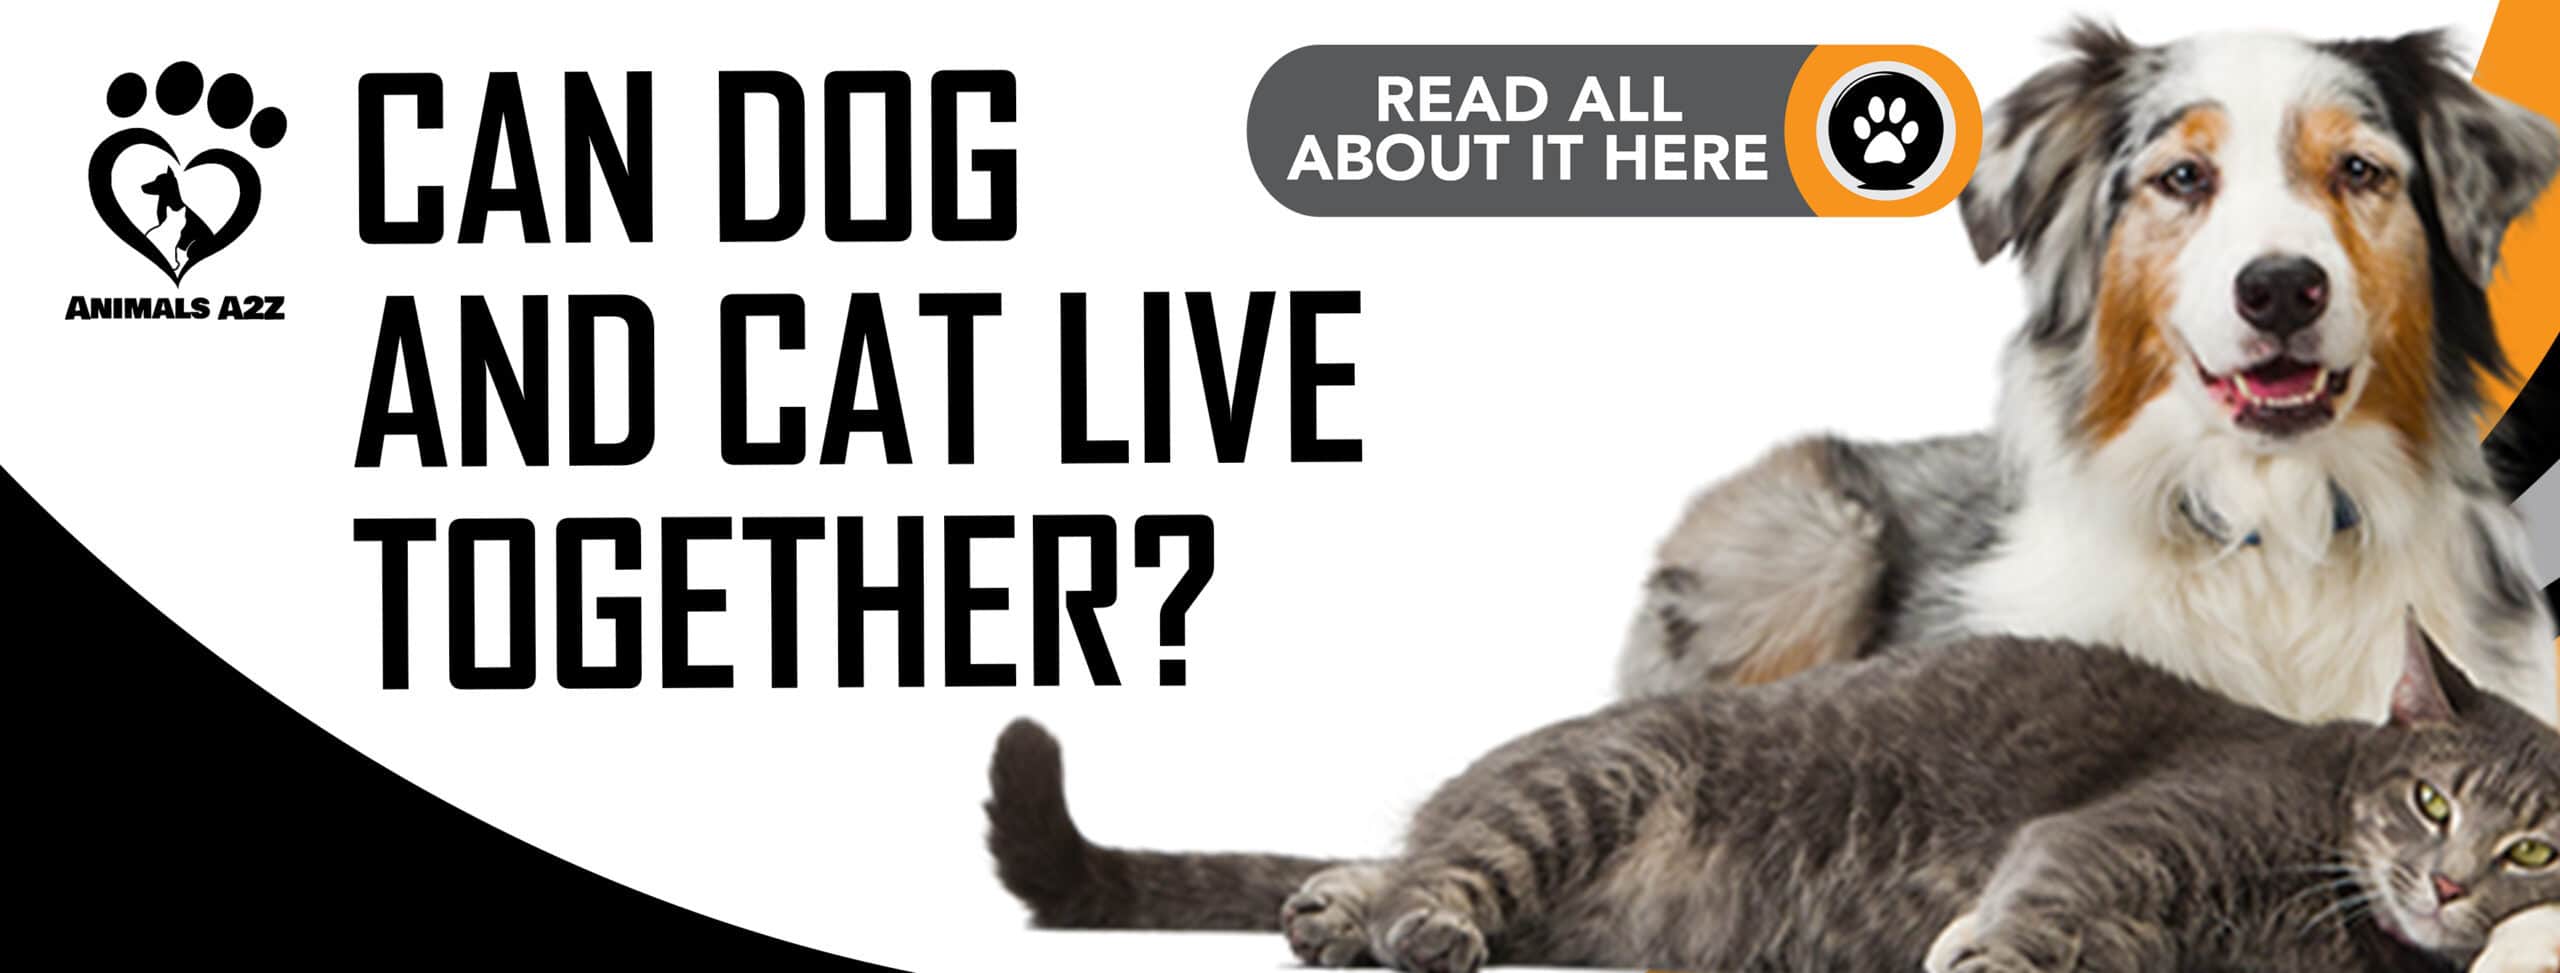 Can dog and cat live together?